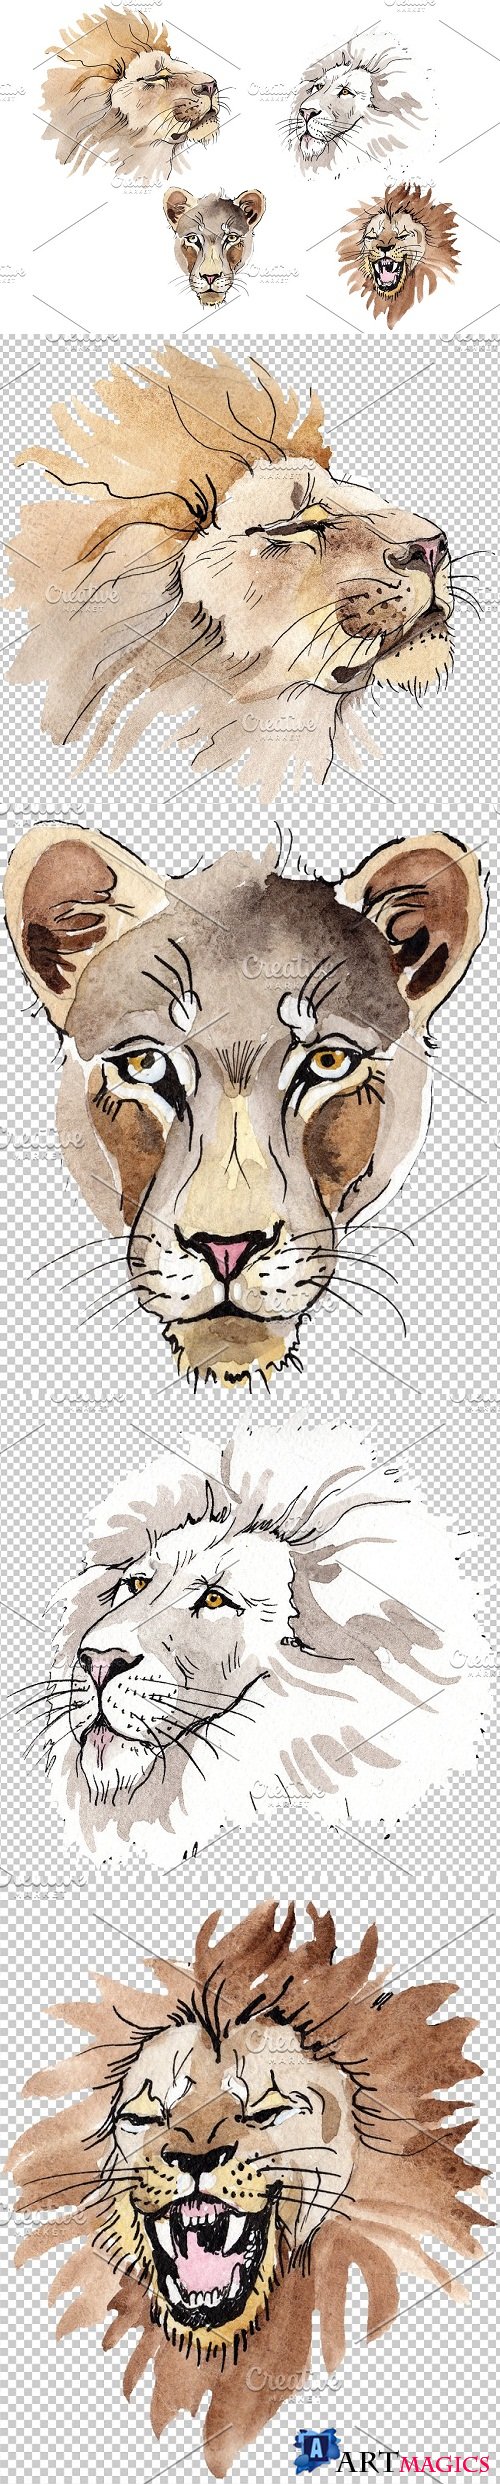 Animal: Lion Watercolor png - 3544891